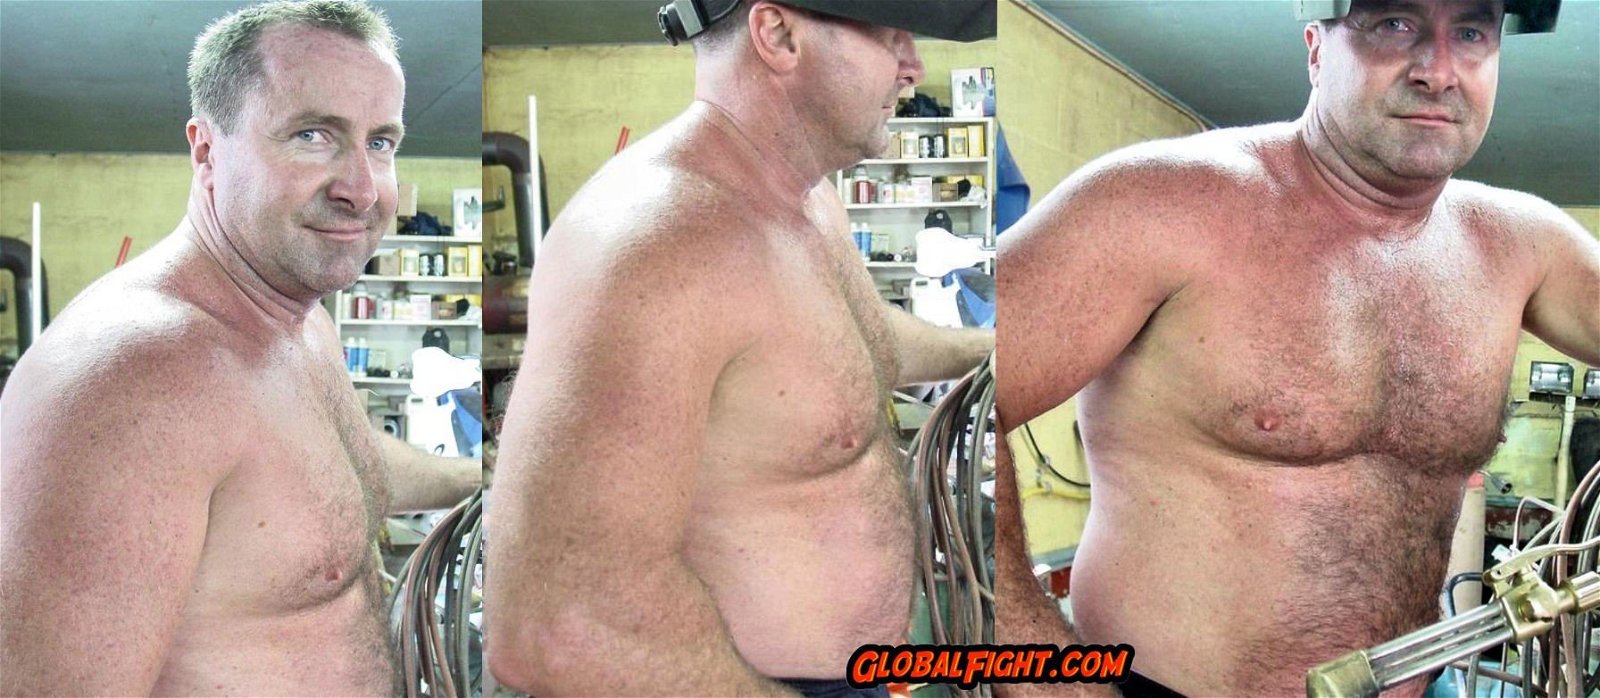 Photo by Hairy Musclebears with the username @hairymusclebears,  February 11, 2023 at 2:43 PM. The post is about the topic Carolina Jim Musclebear and the text says 'Nude Mechanic VIEW THE VIDEO on his page at GLOBALFIGHT com  --  #gaydaddys #gaydare #HairyChested #hairyhunk #hairytrail #hairymale #HairyNSFW #nsfwtwt #dads #daddynsfw #masculinity #MachoAlfa #machosgay #AlphaBoys #gay #gaybear'